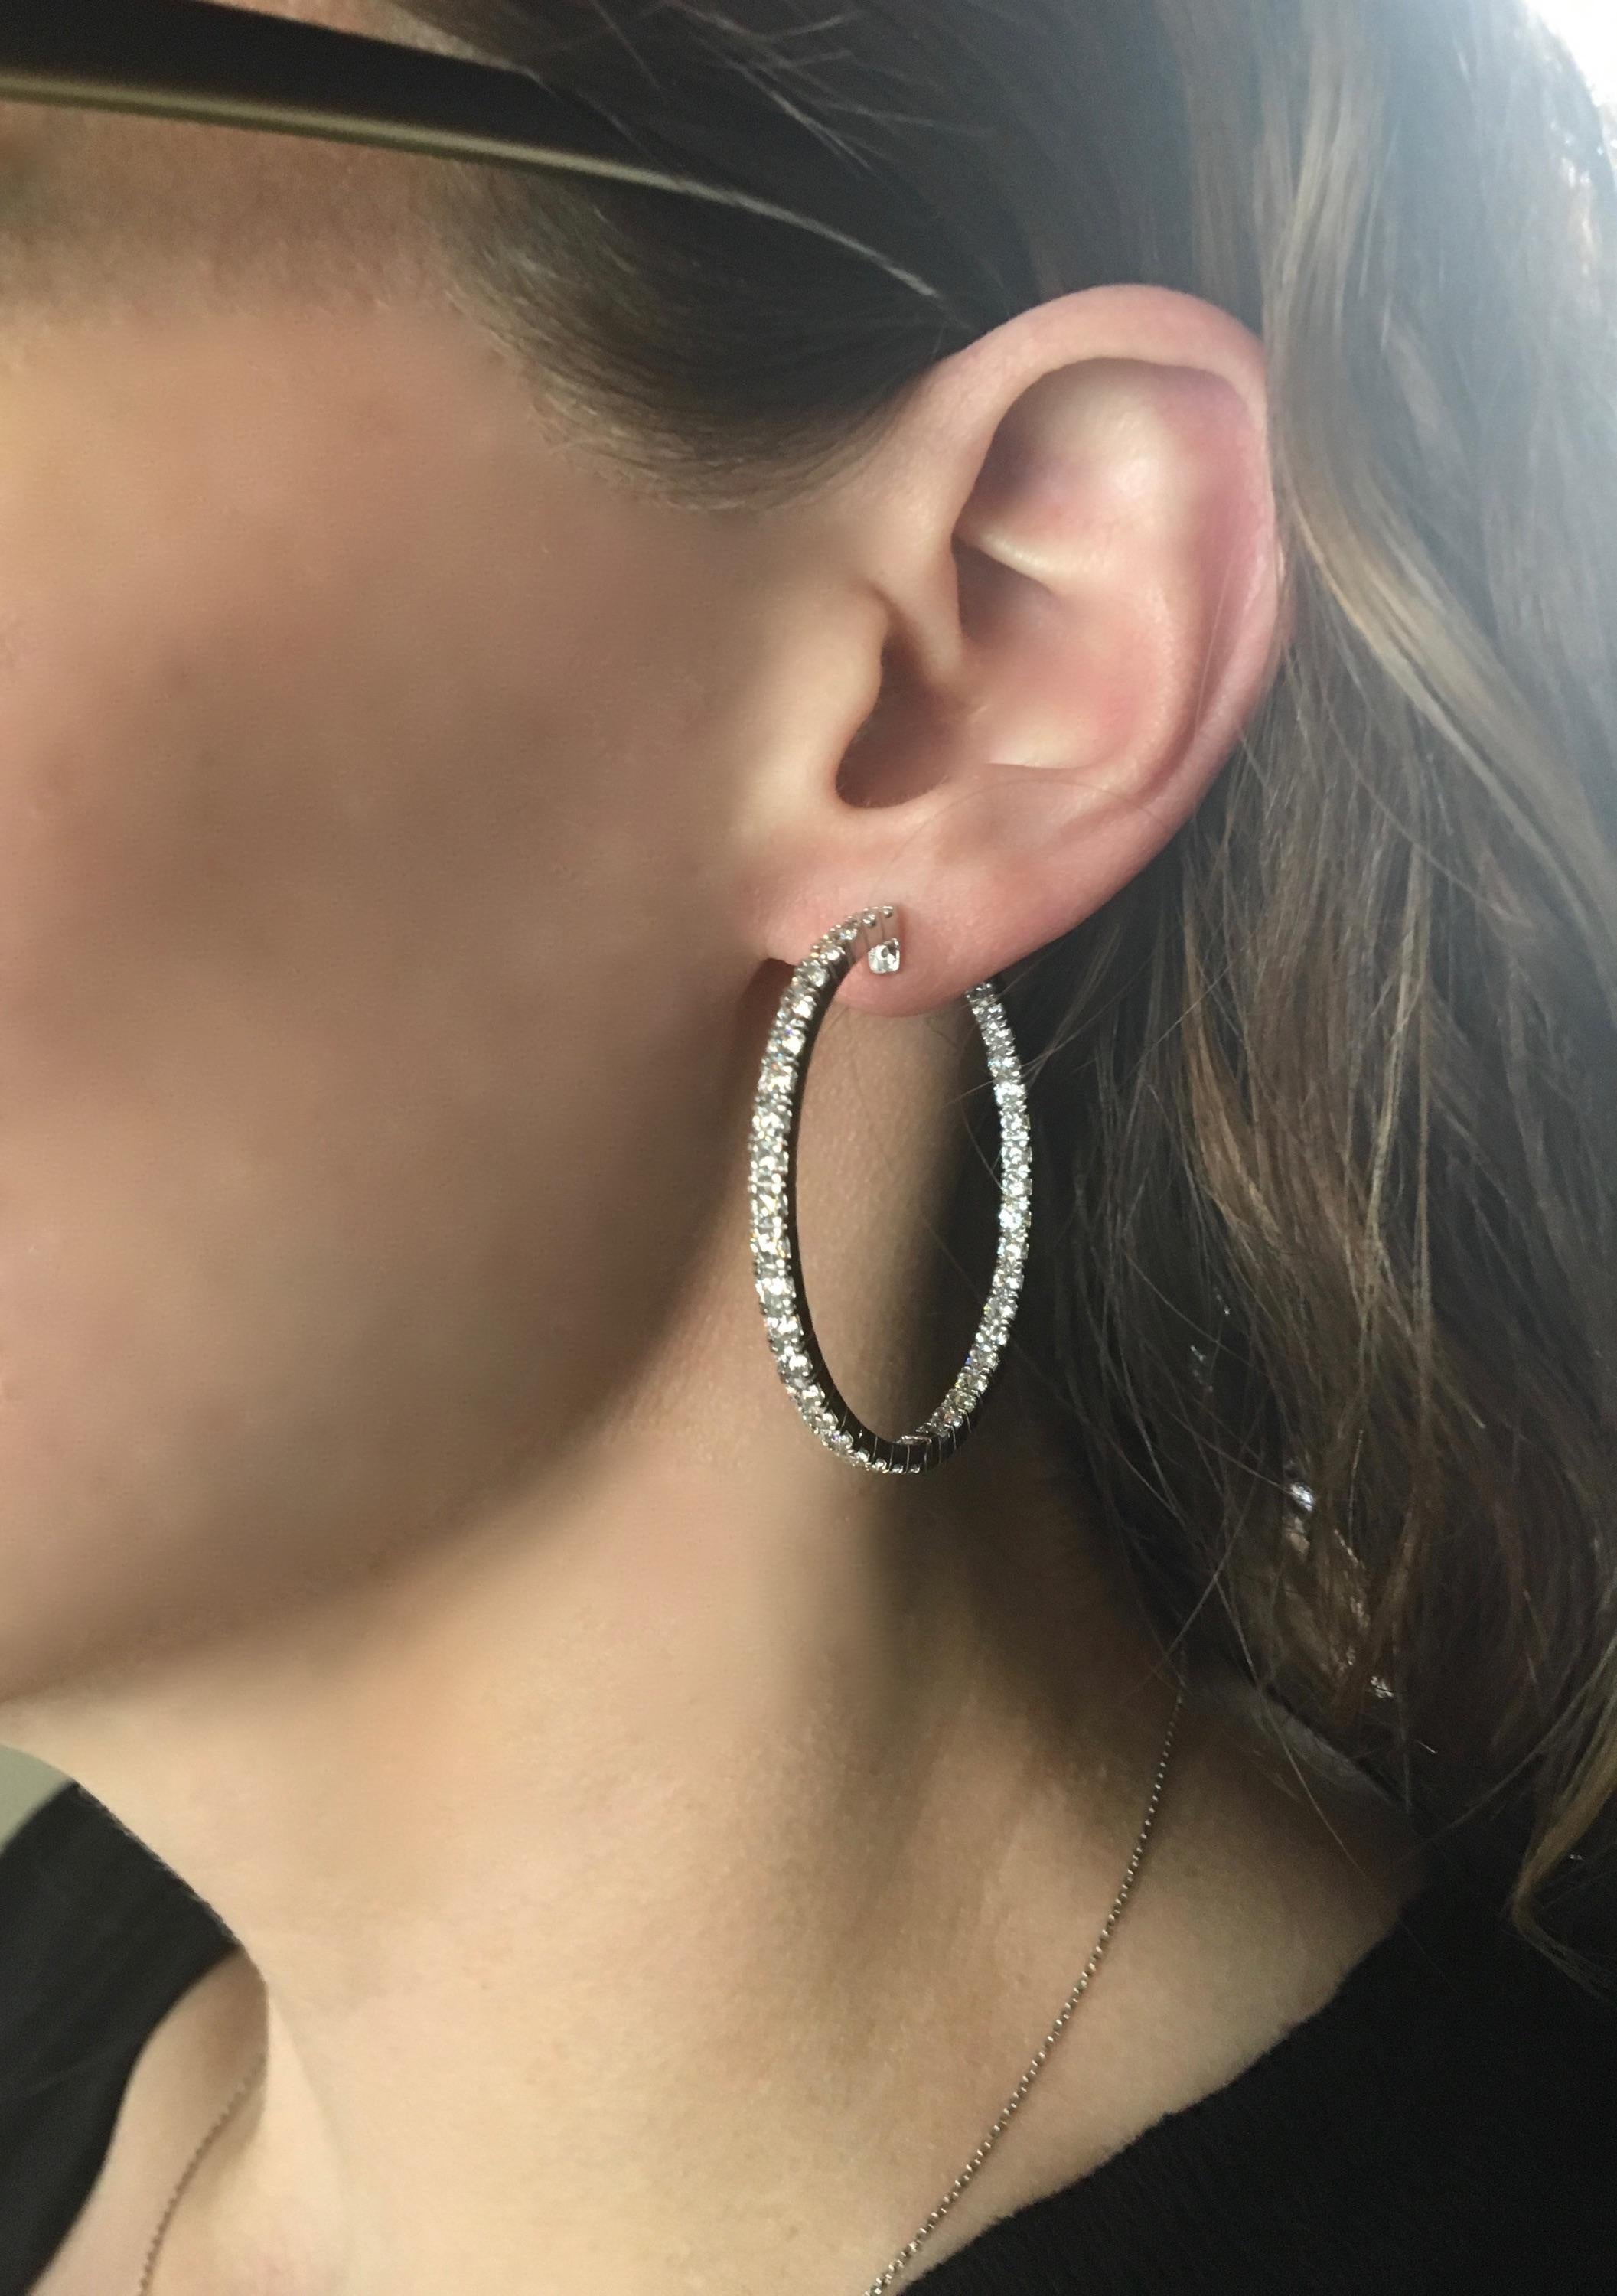 Stunning inside out diamond hoop earrings featuring 5.70ctw of Round Brilliant Cut Diamonds made in 18k white gold.

Diamond Carat Weight: Approximately 5.70CTW 
Diamond Cut: Round Brilliant Diamonds
Color: Average G-I
Clarity: Average VS
Metal: 18K